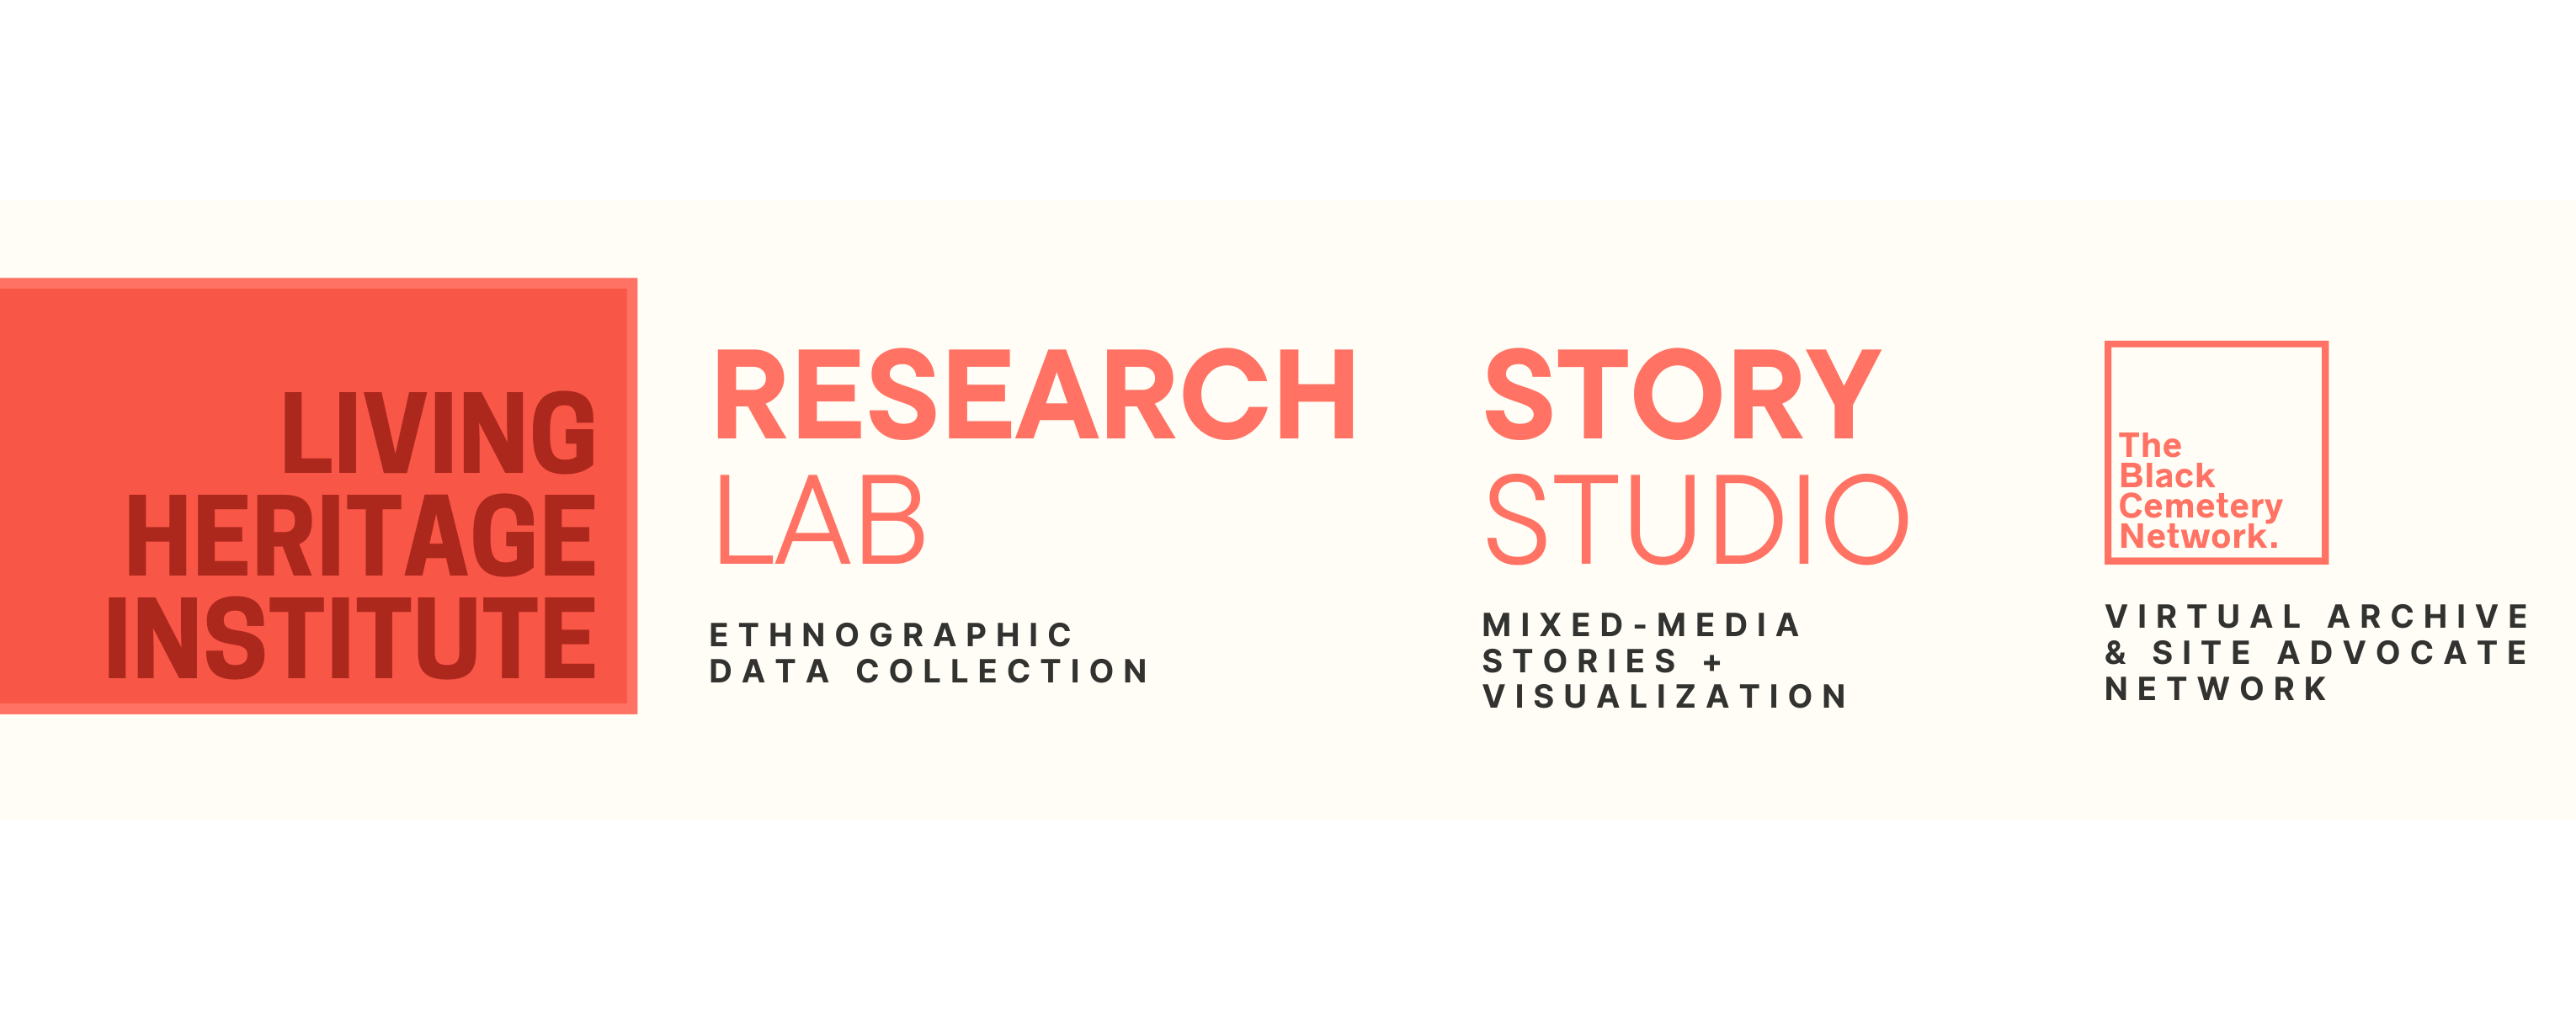 Model graphic depicting the LHI’s three main components with a short description below each part as follows: Research Lab - ethnographic data collection; Story Studio - mixed media stories and visualization; the Black Cemetery Network - Virtual archive and site advocate network